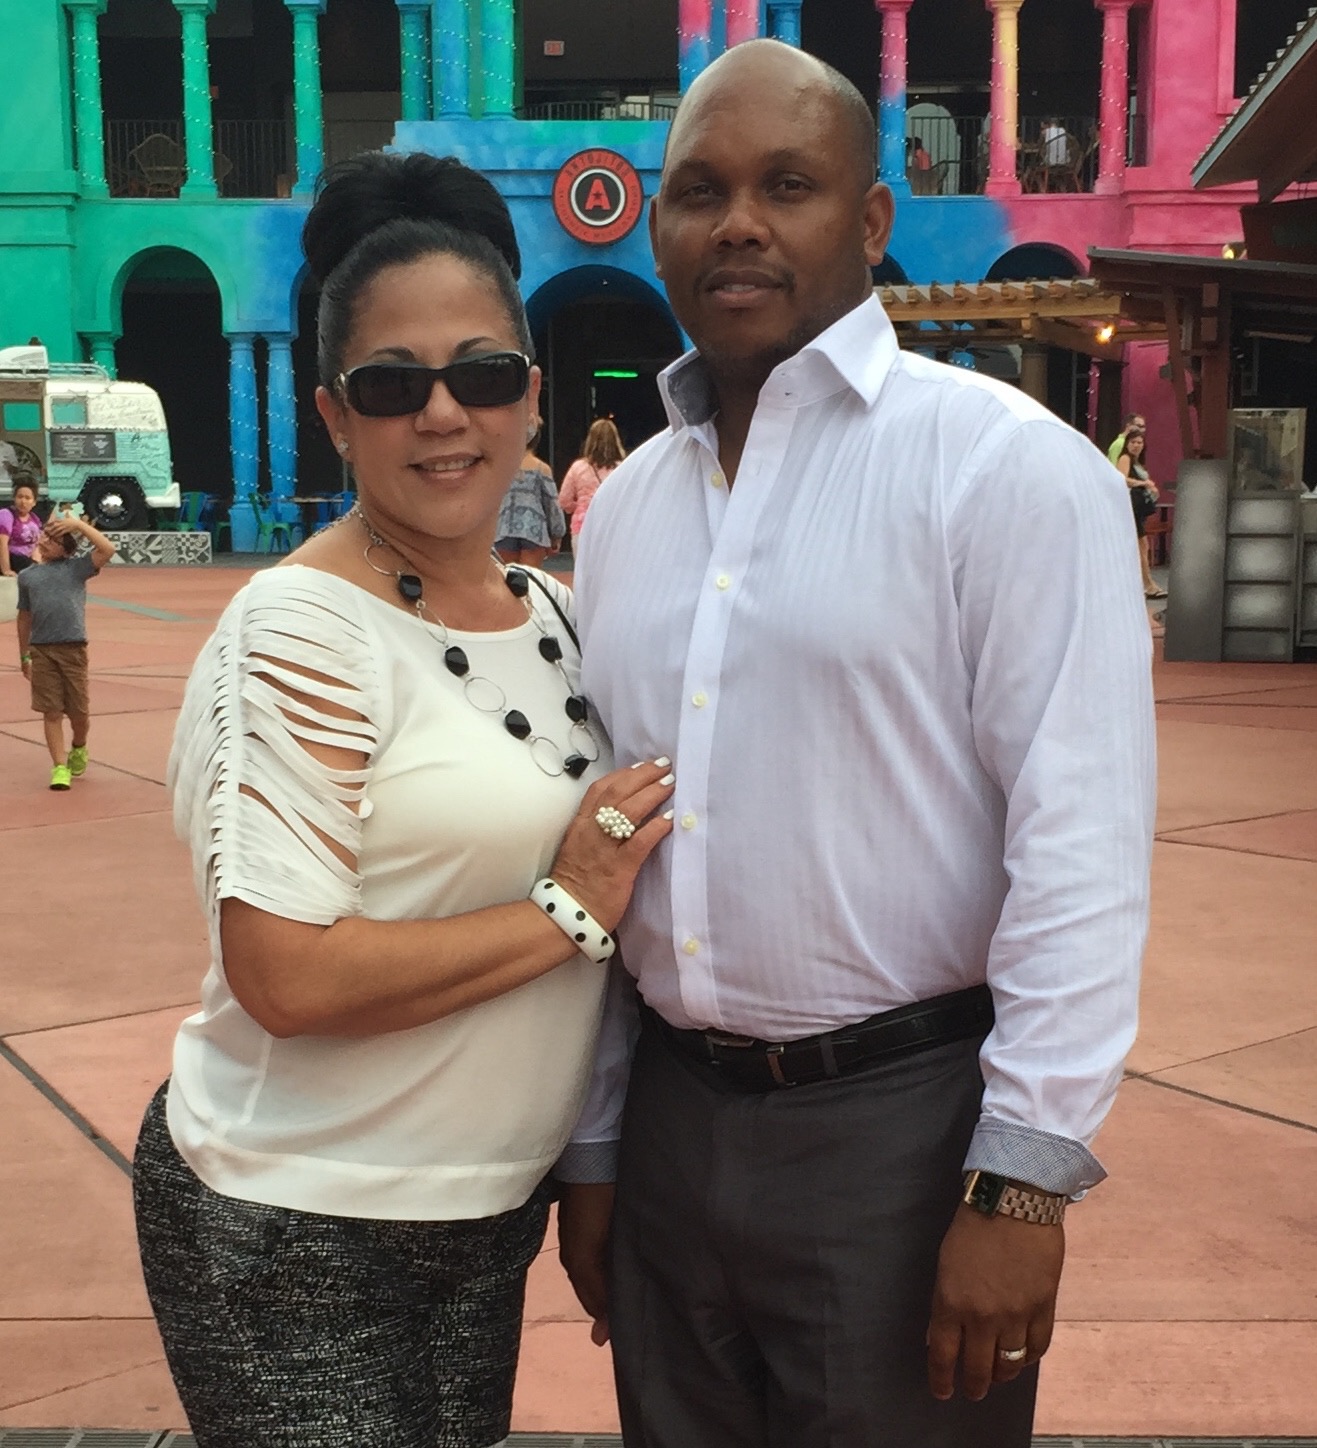 Tyrone Forbes, Planet Smoothie Franchise owner, stands with his wife in front of a bright green, blue, and pink background in a button up shirt and a smile on his face while his wife rests her hand on his chest and smiles at the camera